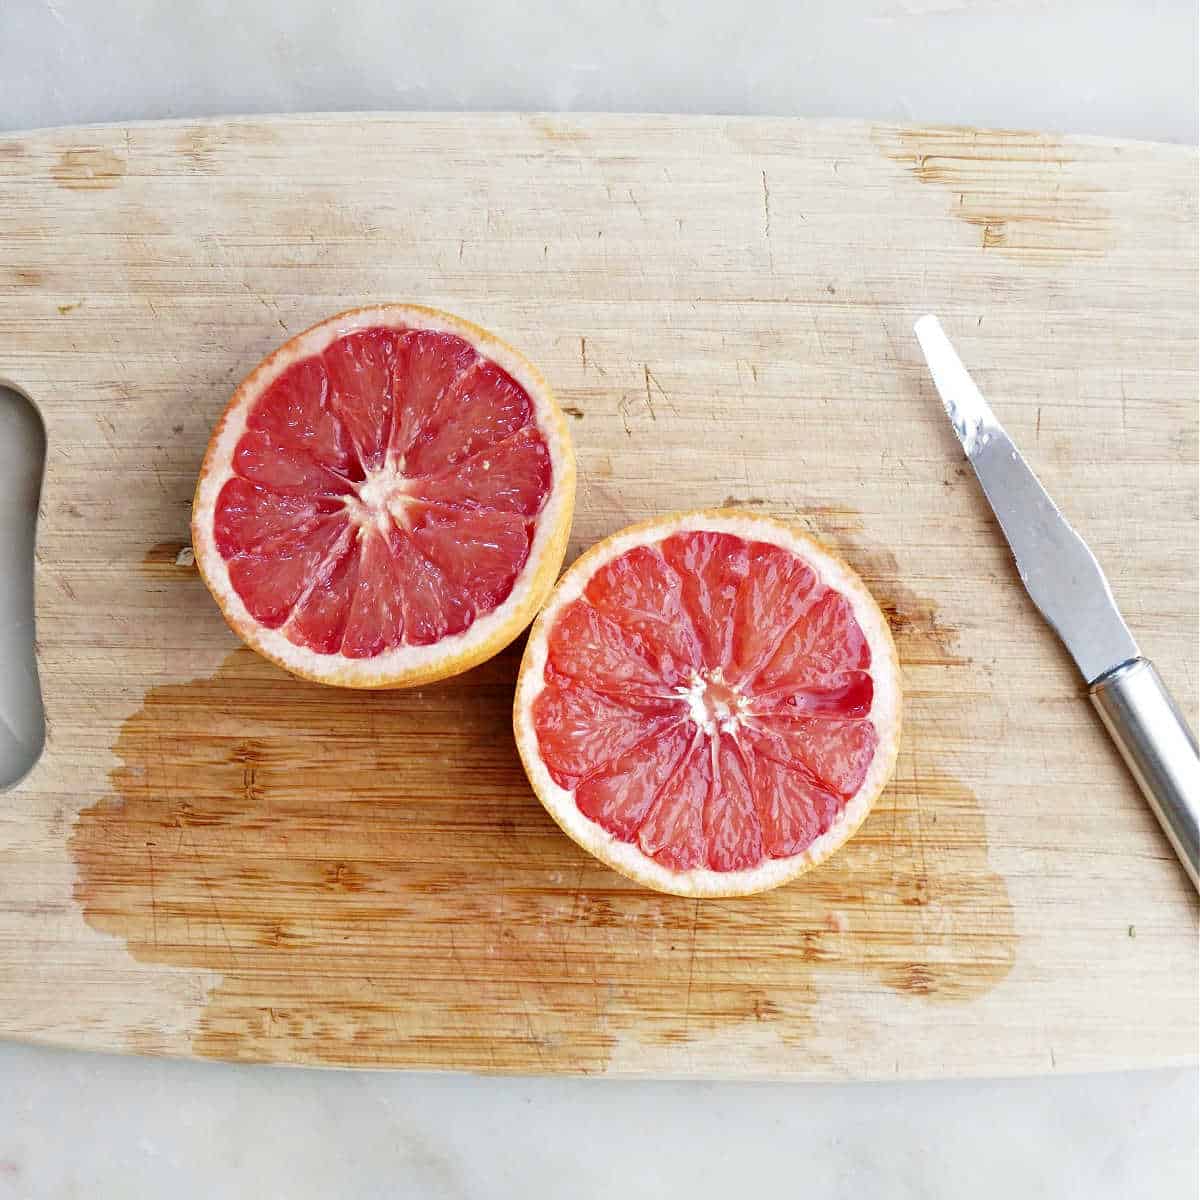 grapefruit after being segmented with a grapefruit knife on a cutting board